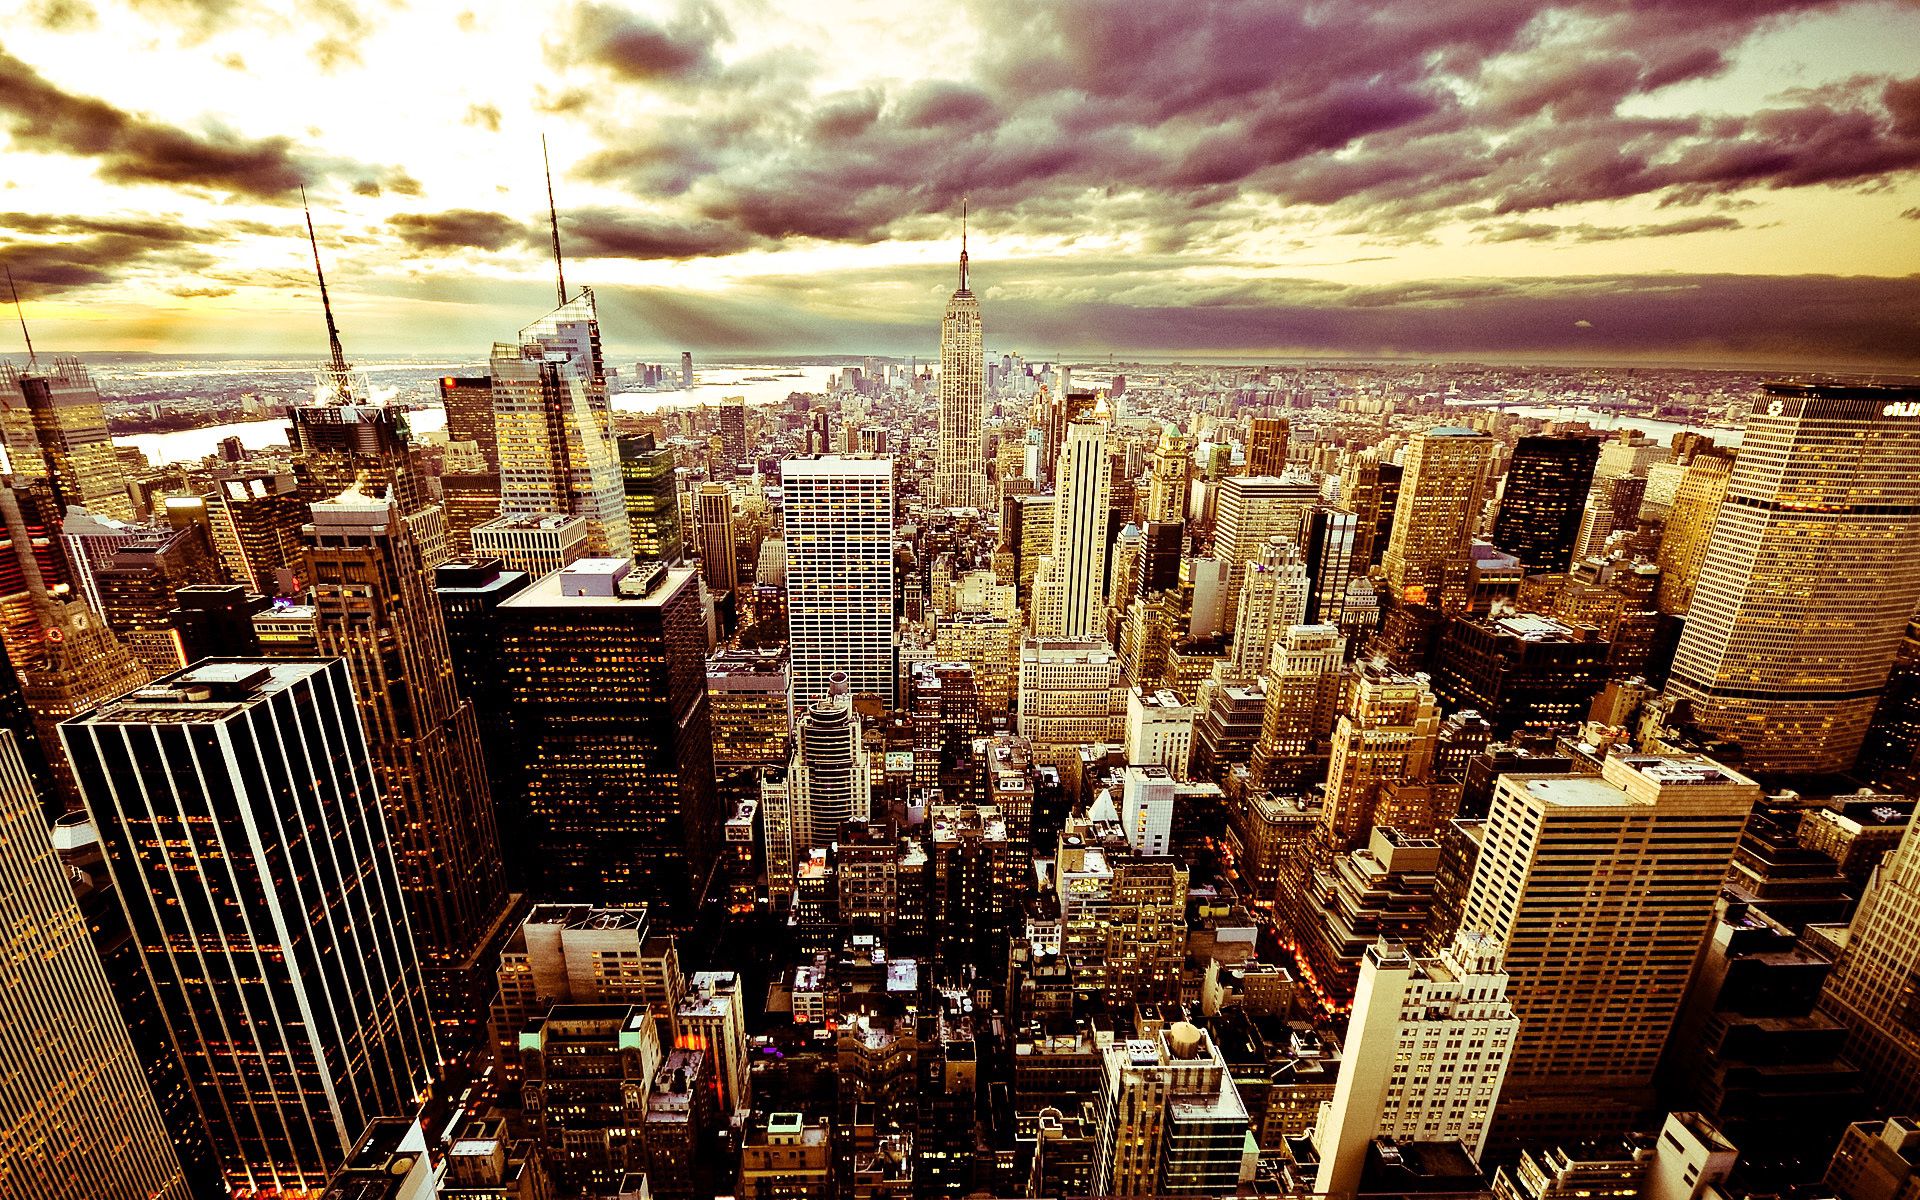 america, skyscrapers, usa, cities, sky, clouds, city, building, evening, united states, new york, handsomely, it's beautiful, ny